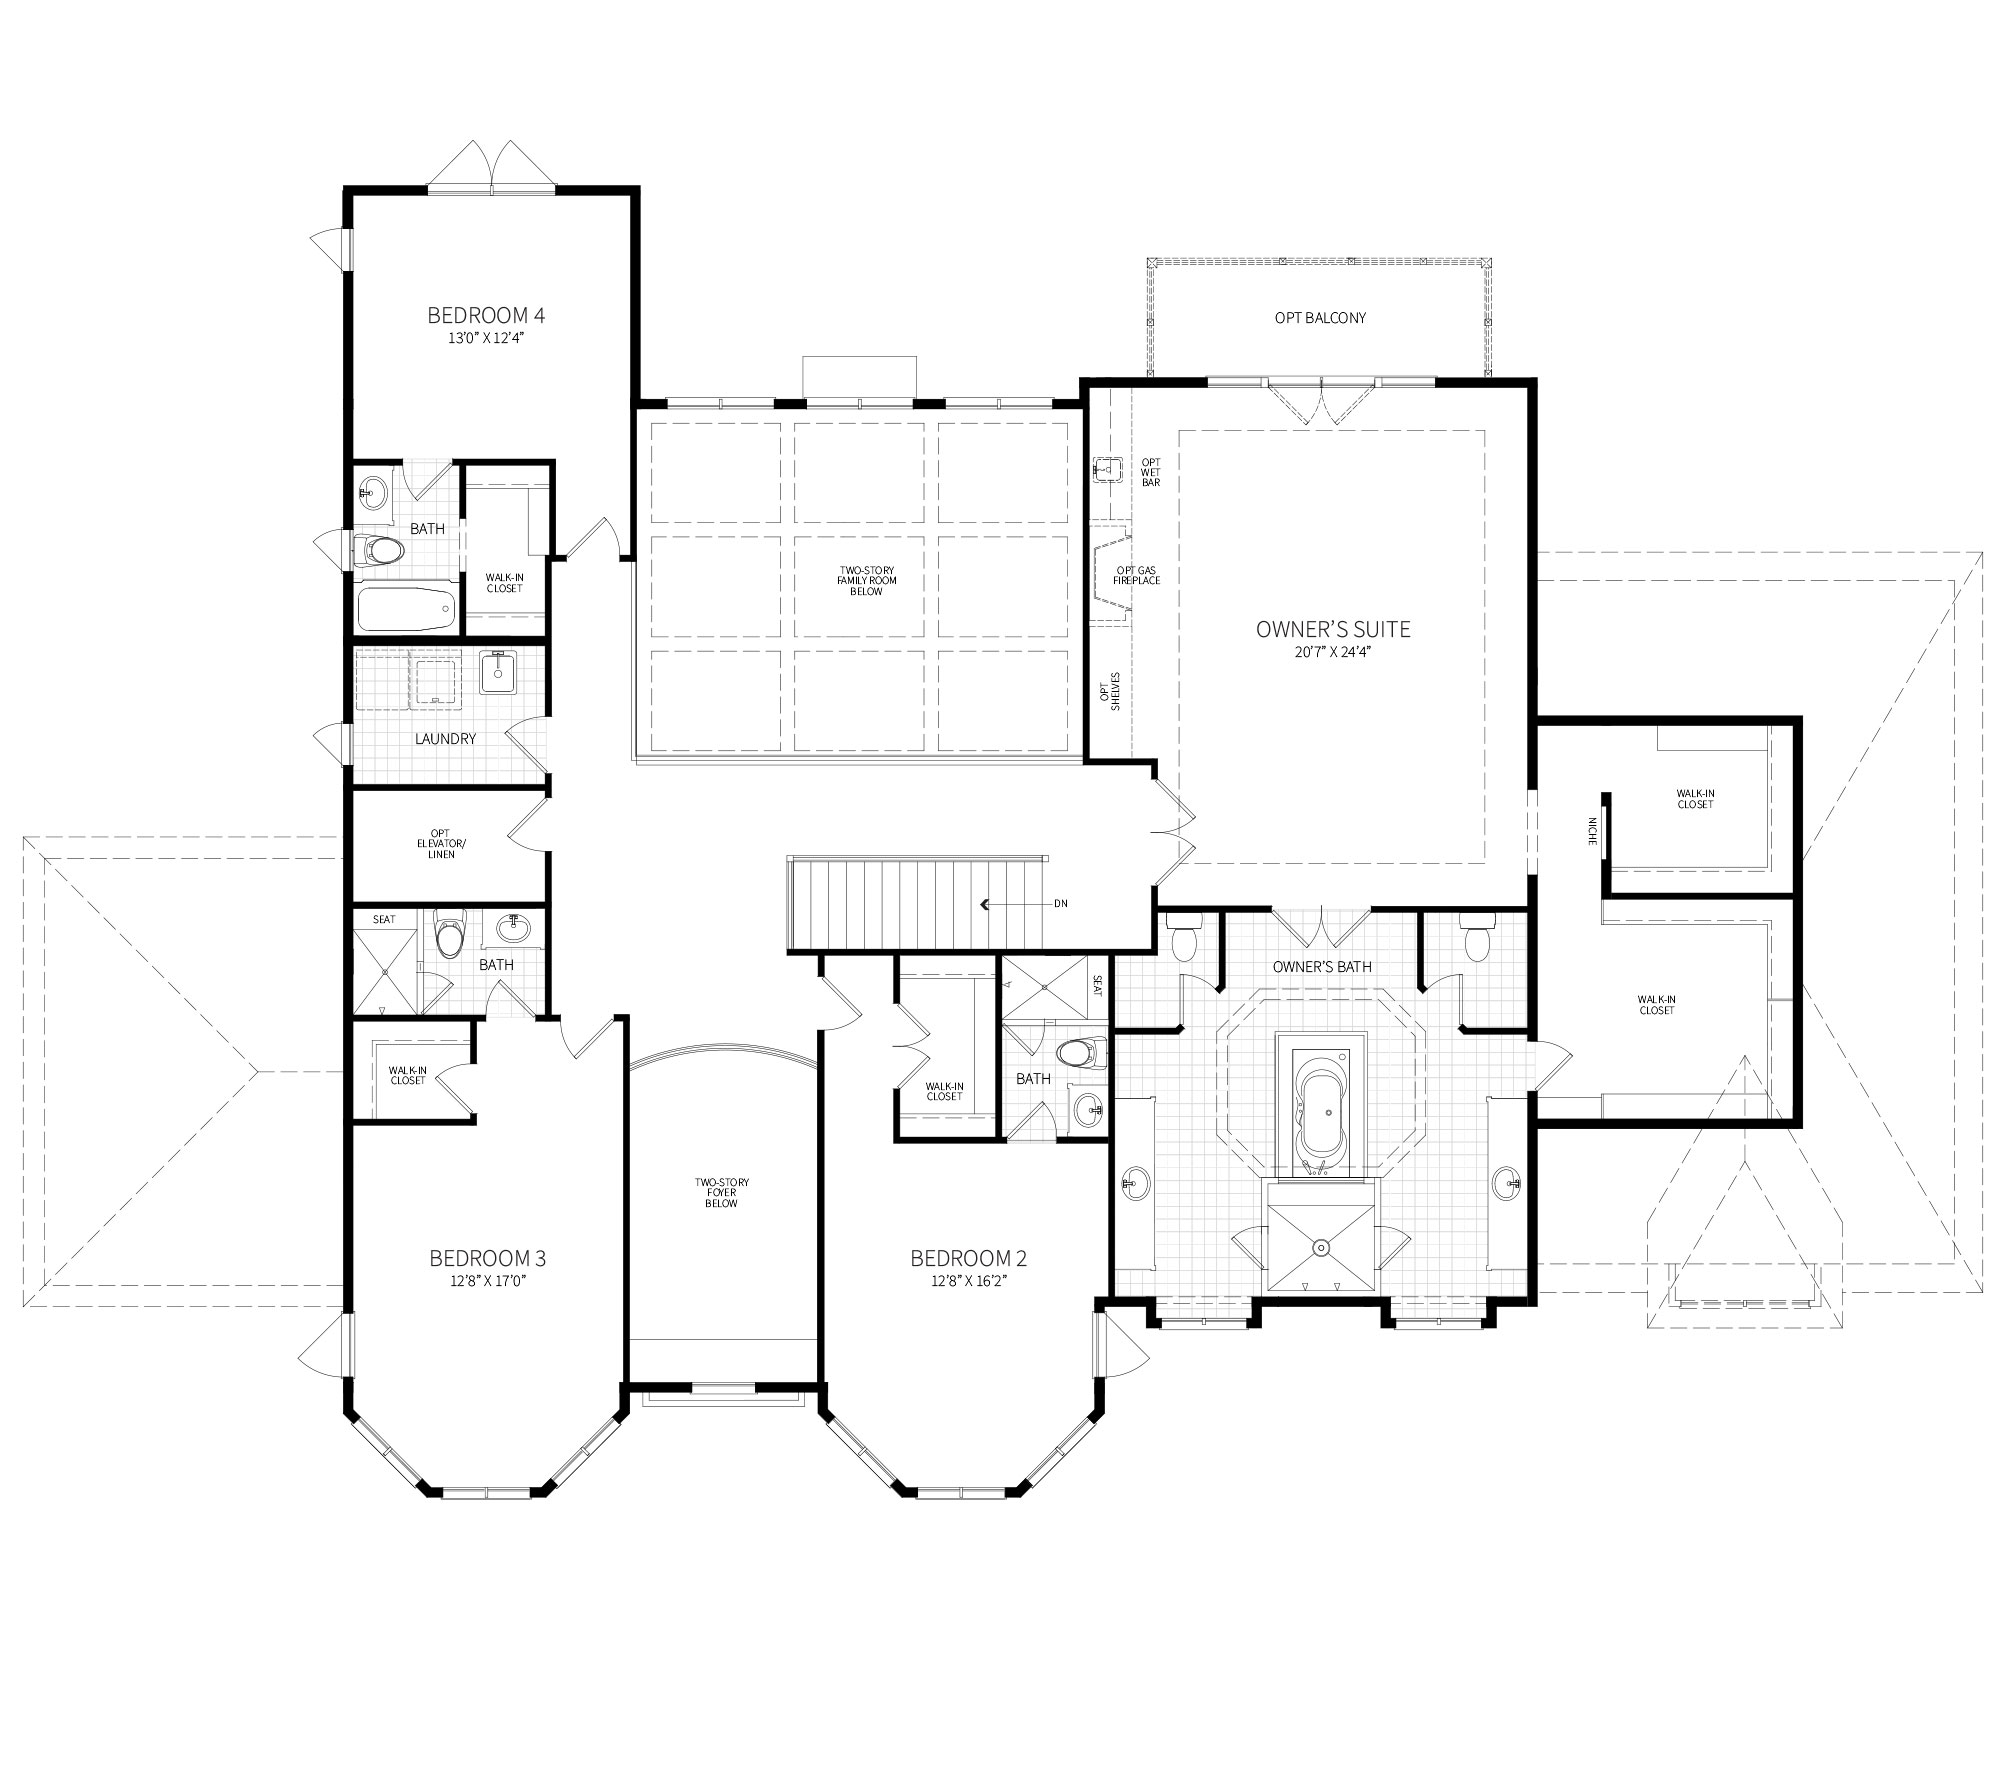 Second floor plan of the Horseshoe model, shows entire wing as large owner's suite with oversized closets and master bath. 3 additional bedrooms shown.